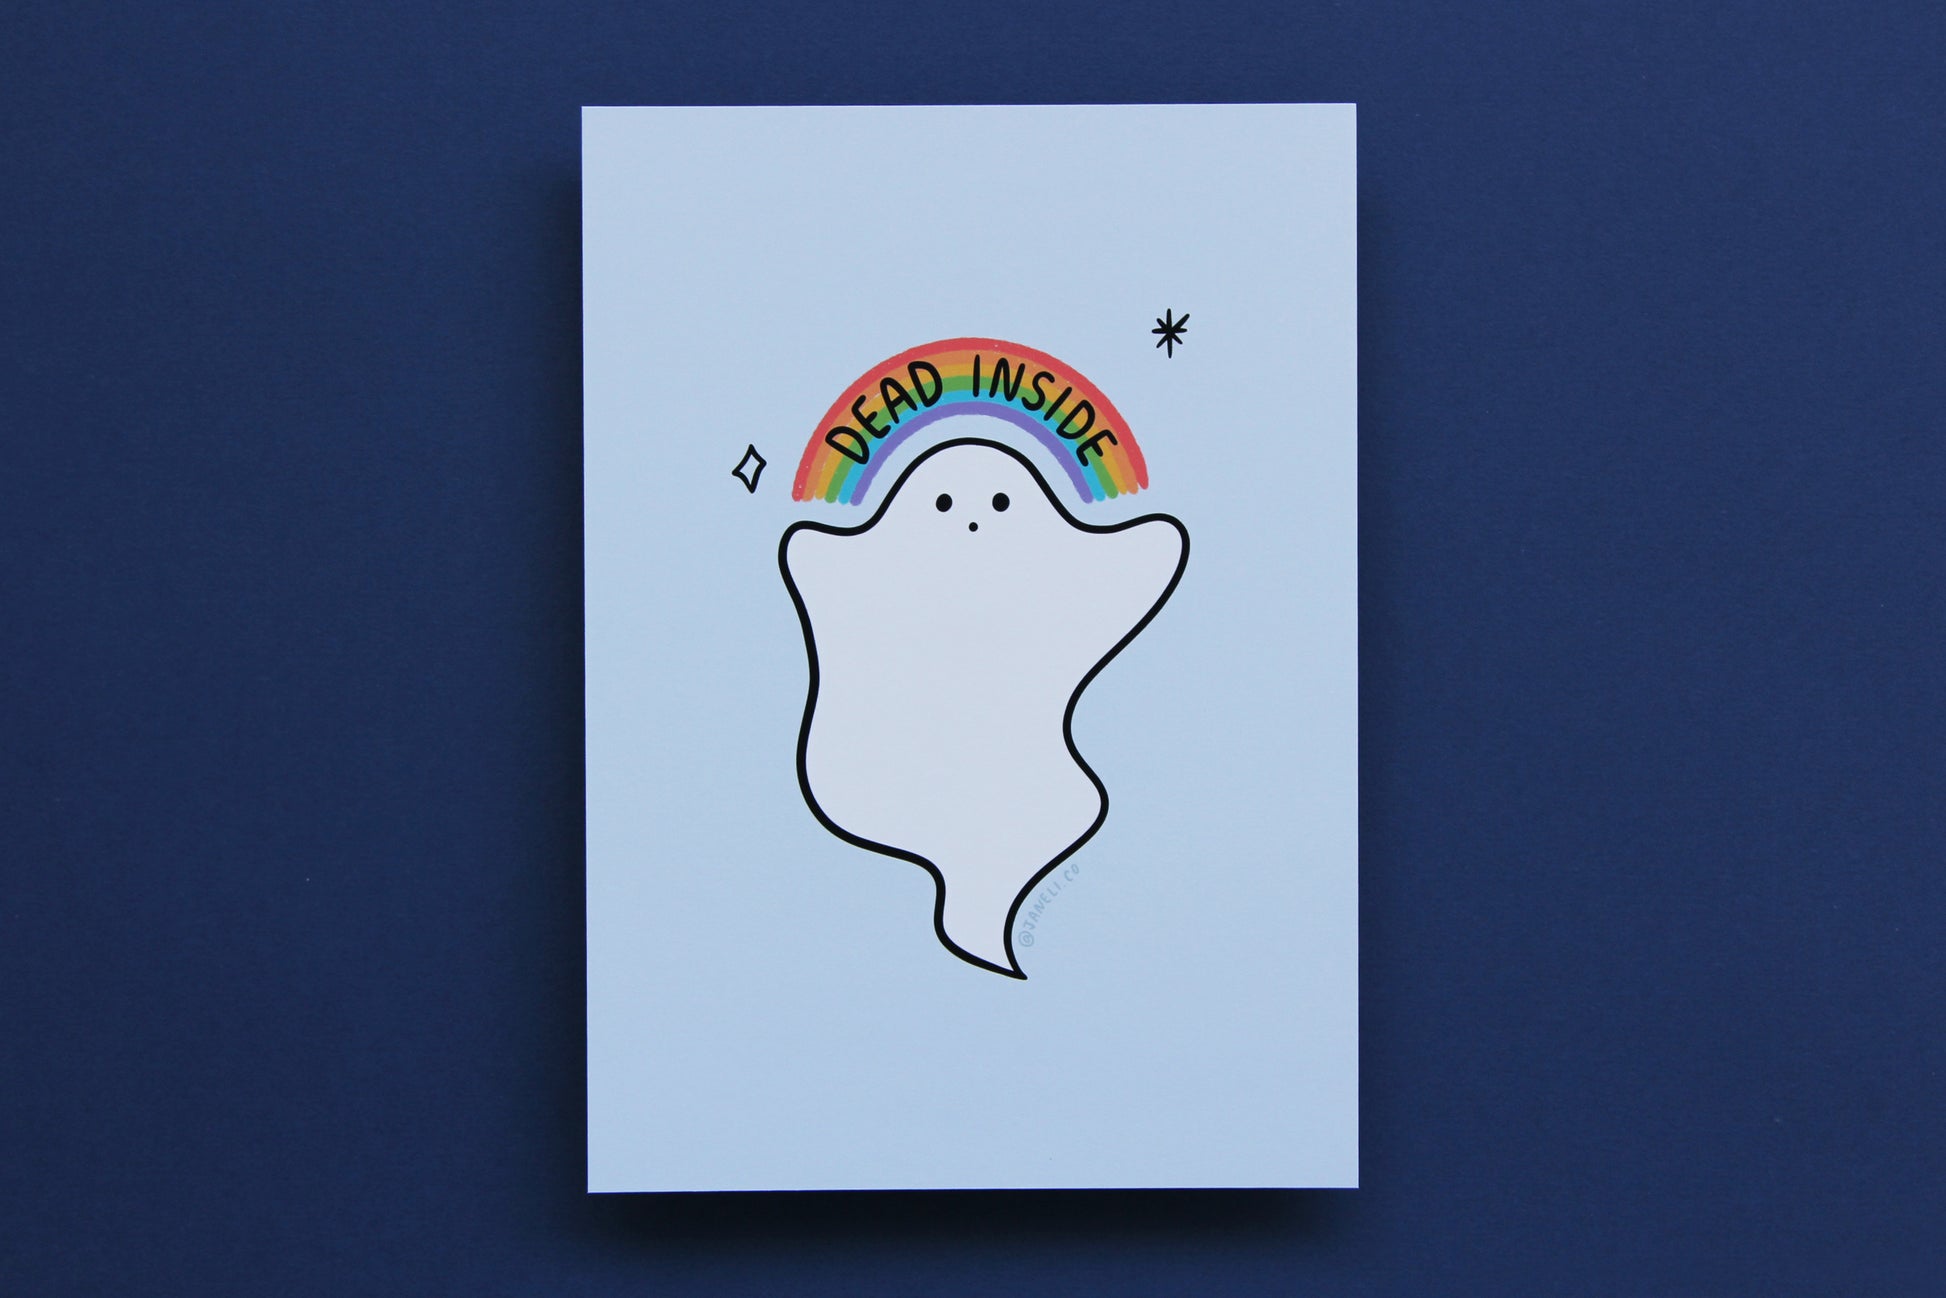 A JaneLi.Co print that shows a little white ghost holding up a rainbow that says "Dead Inside" over a navy blue background.